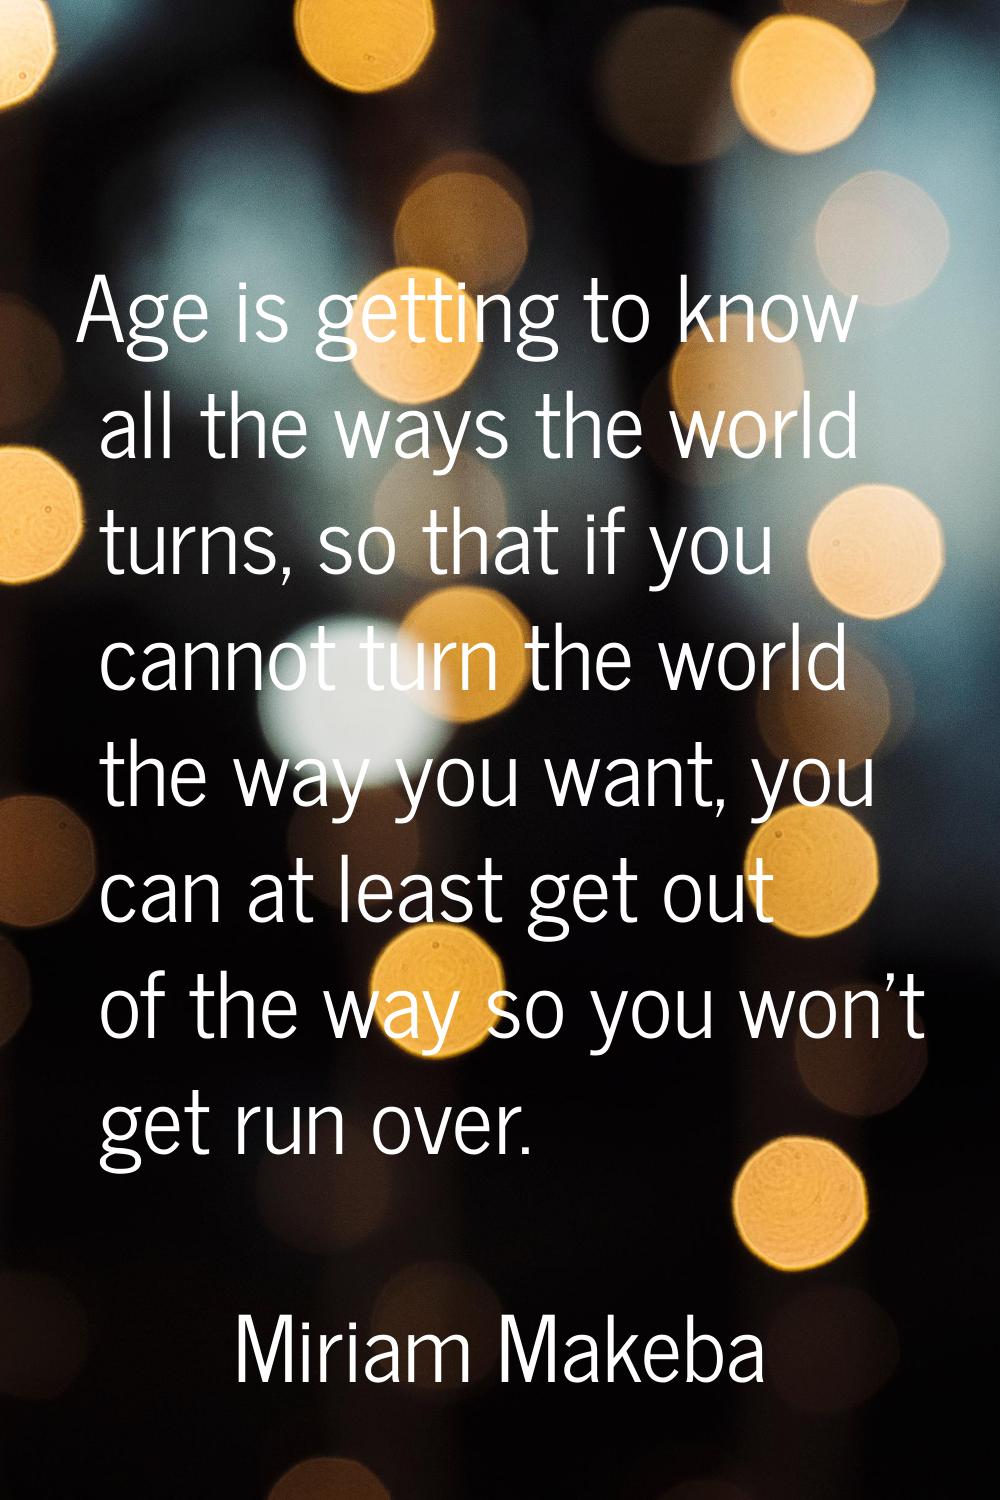 Age is getting to know all the ways the world turns, so that if you cannot turn the world the way y